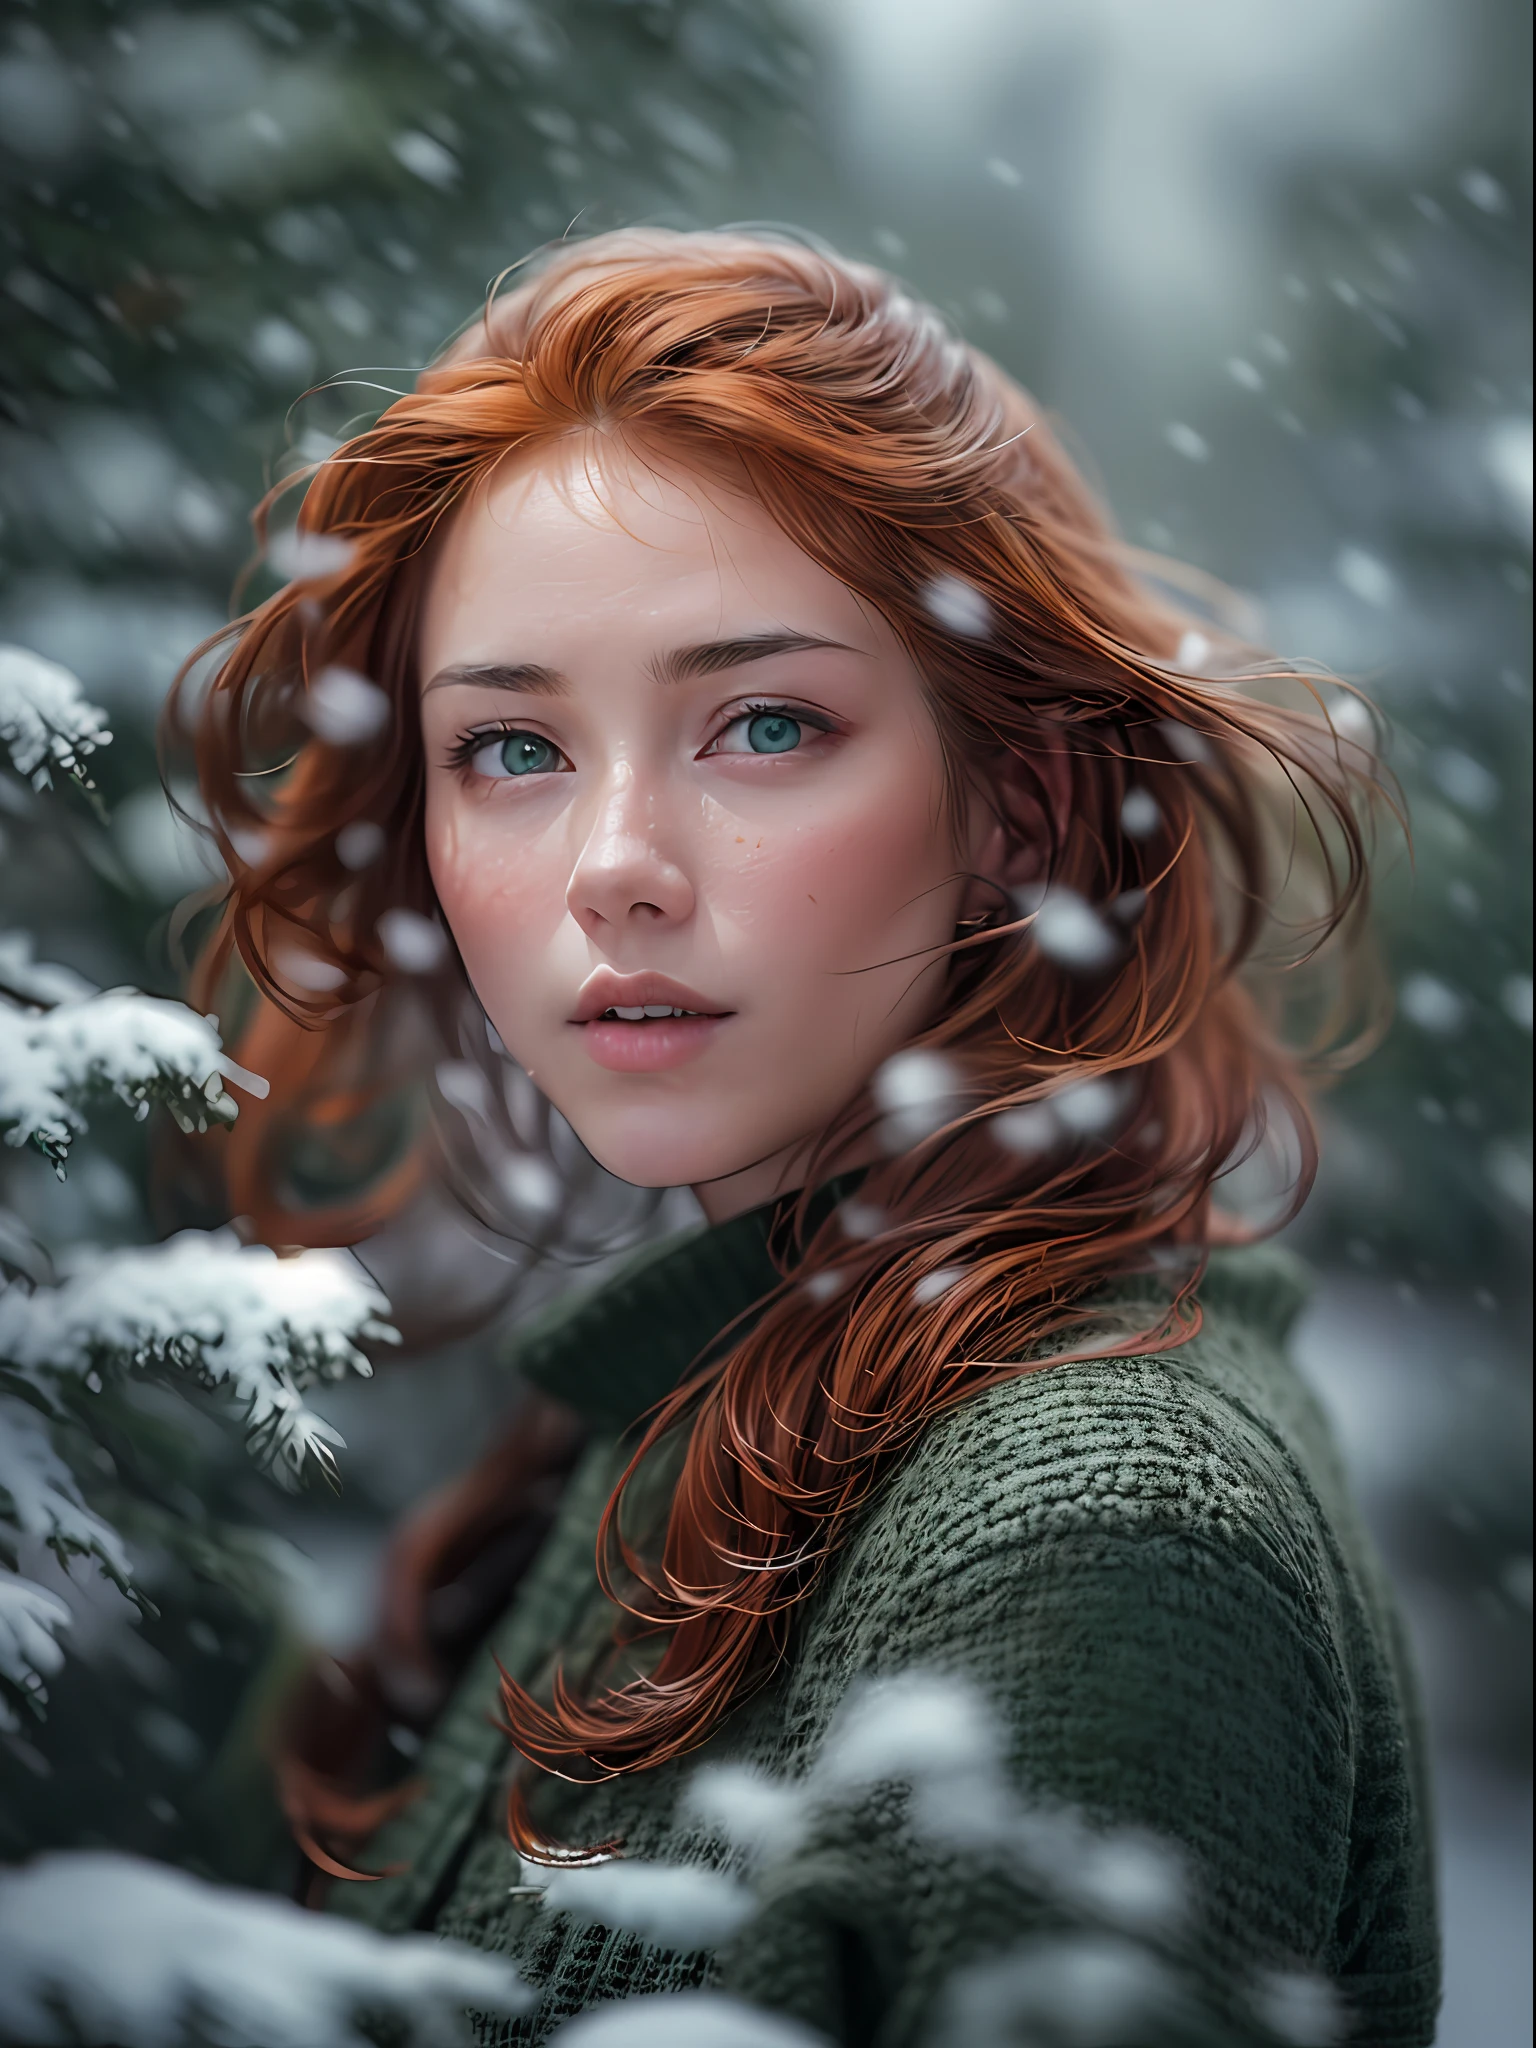 (masterpiece, high resolution, photo-realistic:1.3), (portrait of a slender and perfectly proportioned redhead in the snow:1.2), (her captivating green eyes gleaming with wonder:1.2), (rosy cheeks from the cold winter air:1.1), (eyebrows matching the color of her hair:1.1), (flawless facial features:1.1), (dressed in specially insulated winter clothing:1.1), (Sony Alpha 1 camera, perfect for capturing stunning details in challenging environments:1.2), (paired with the Sony FE 70-200mm f/2.8 G Master lens:1.2), (standing amidst a forest with bare trees:1.1), (snow gently falling around her:1.1), (a serene winter wonderland setting:1.1), (the camera and lens combination ensuring sharpness and clarity in the portrait:1.1), (her fiery red hair contrasting beautifully with the snowy landscape:1.1), (her eyes reflecting the magic of the winter scene:1.1), (the warmth and coziness of her winter attire:1.1), (a sense of peace and tranquility captured in the moment:1.1), (the Sony FE 70-200mm f/2.8 G Master lens creating a stunning background bokeh:1.1), (a portrayal of natural beauty in a wintry setting:1.1), (the model's radiance shining through even in the cold:1.1), (an image that embraces the beauty of the changing seasons:1.1), (the camera's high-speed capabilities capturing the falling snow:1.1), (the enchanting atmosphere of the winter forest:1.1), (a timeless portrait of a redhead in the snow:1.1).